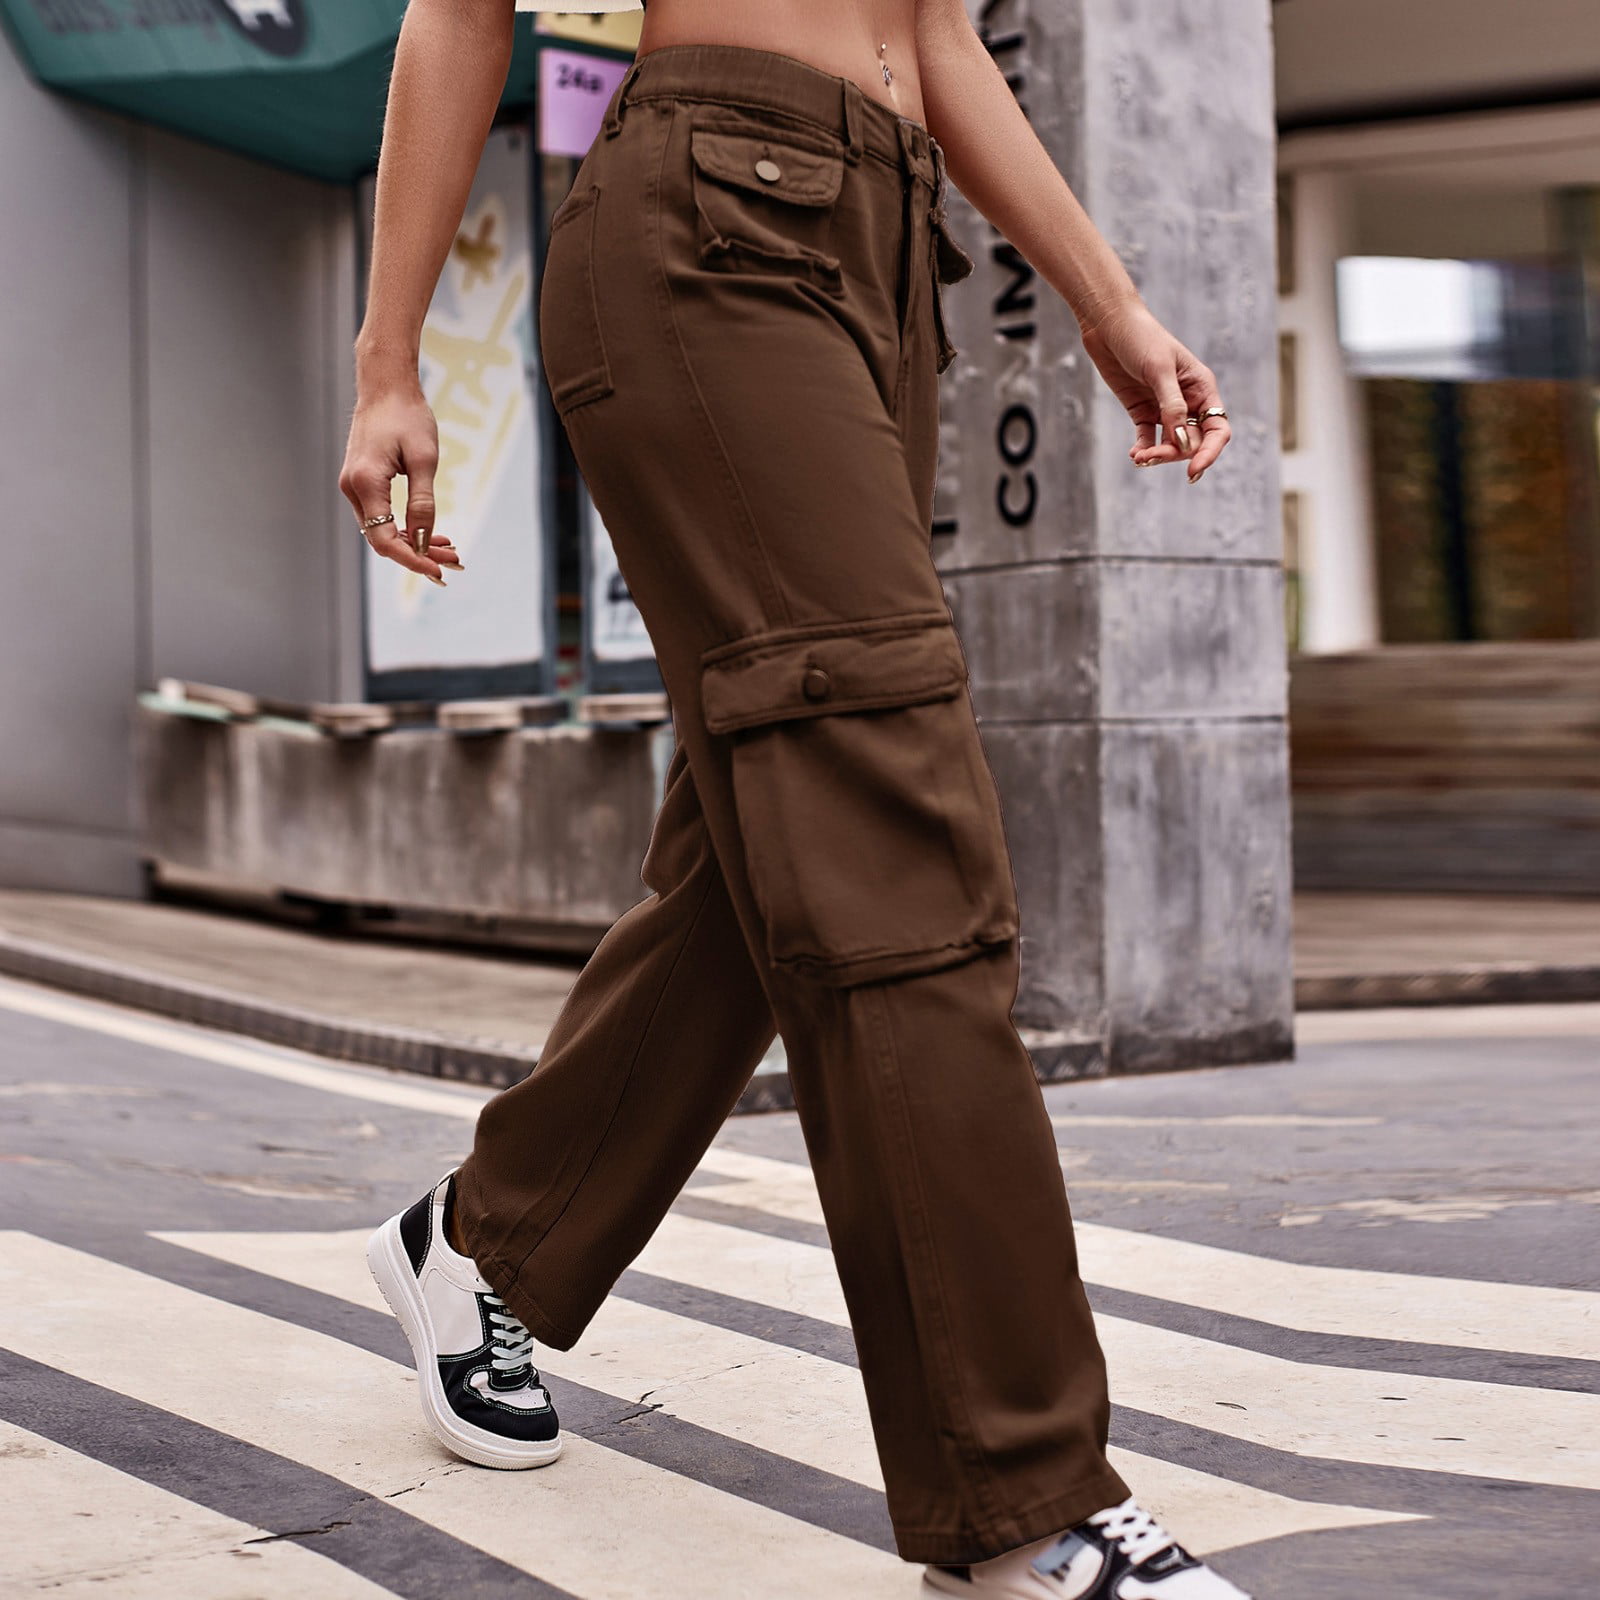 20 Cargo Pants Outfits for Any and All Occasions